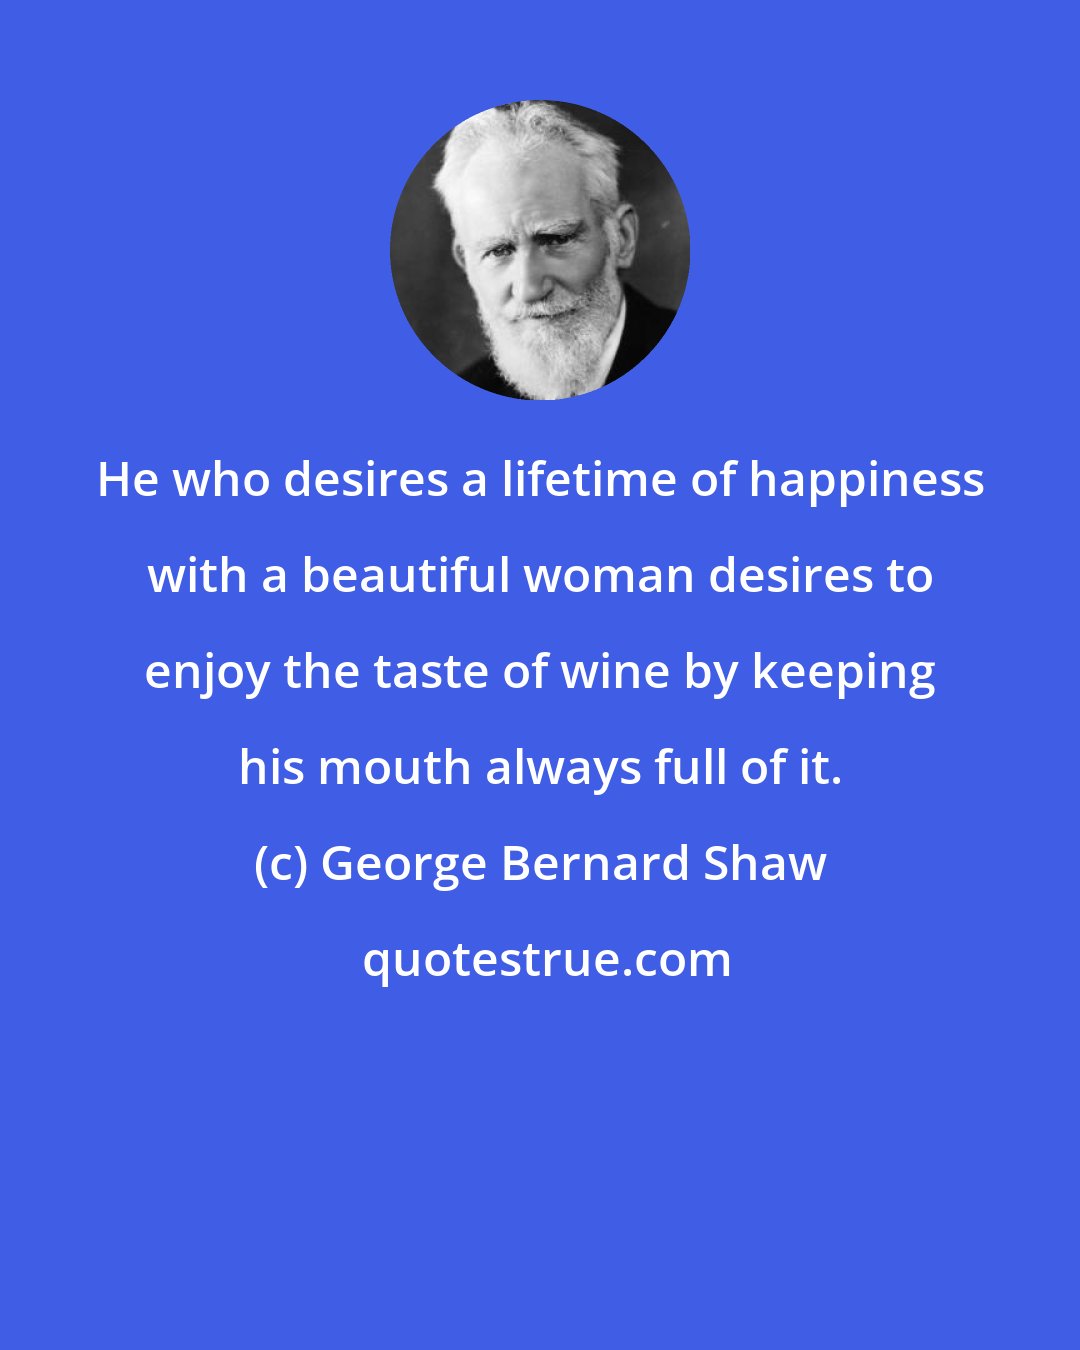 George Bernard Shaw: He who desires a lifetime of happiness with a beautiful woman desires to enjoy the taste of wine by keeping his mouth always full of it.